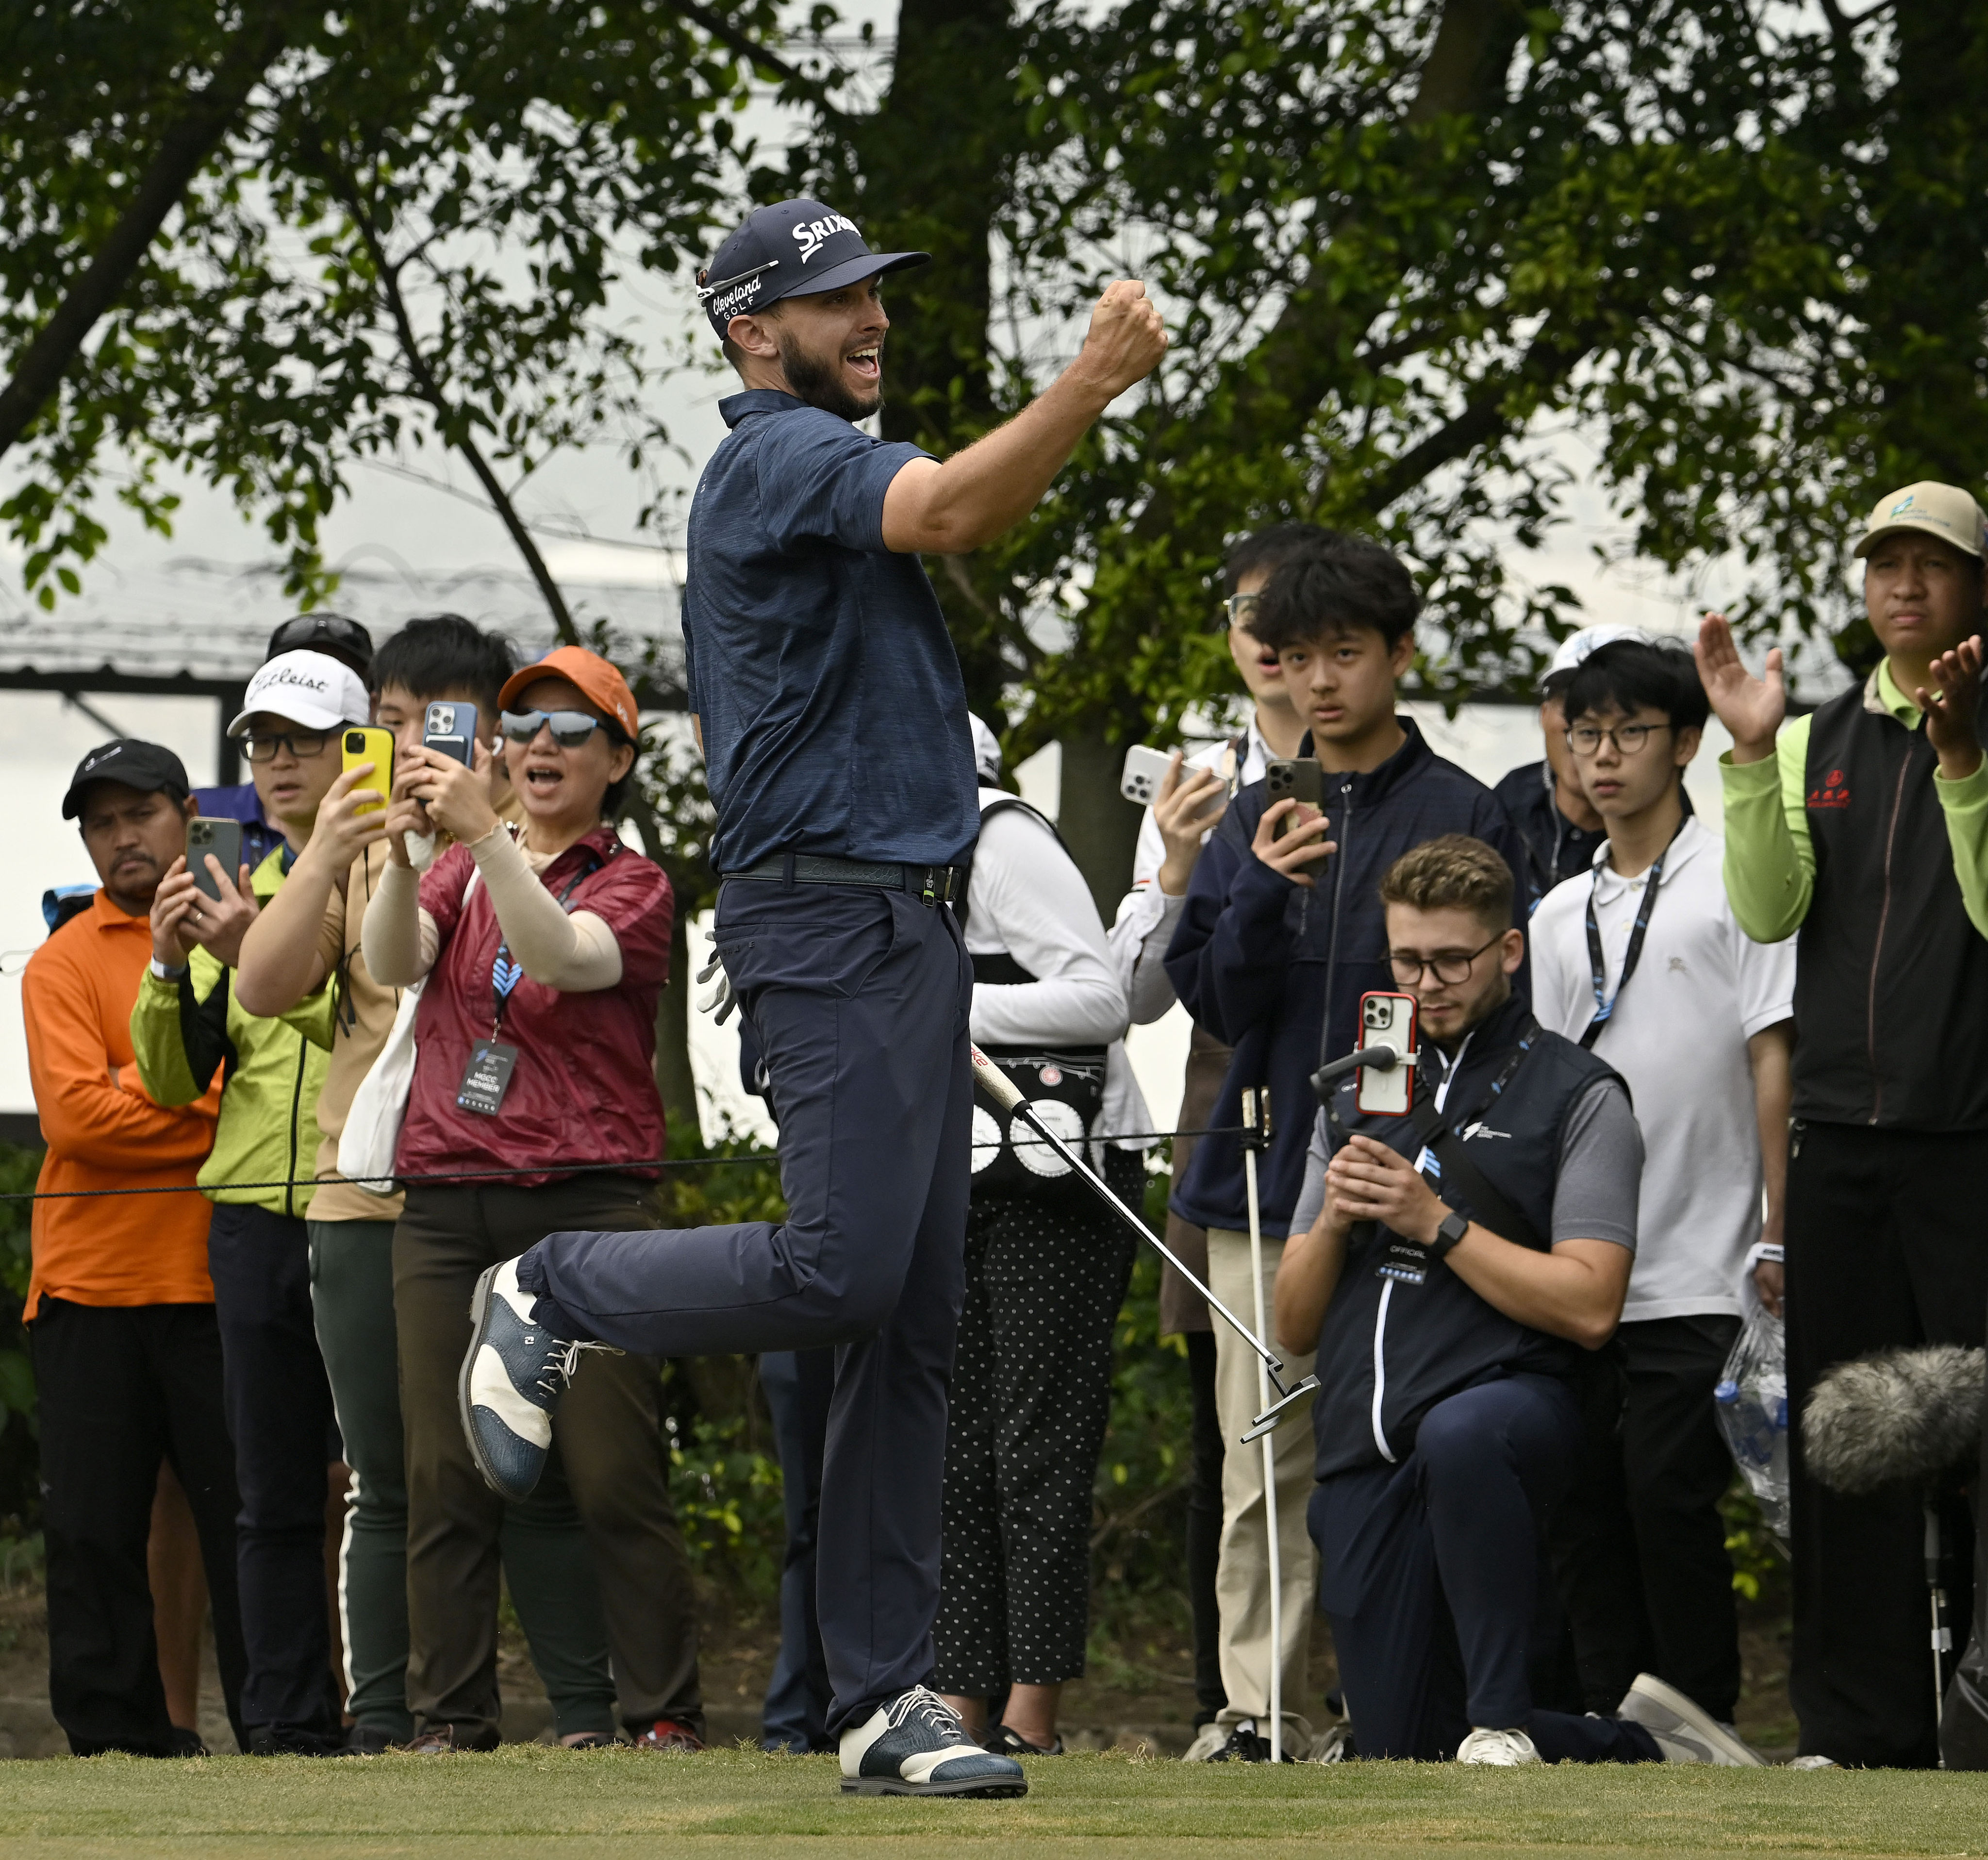 John Catlin celebrates his eagle putt on the 18th green and a score of 59 in the third round of the International Series Macau. Photo: Asian Tour